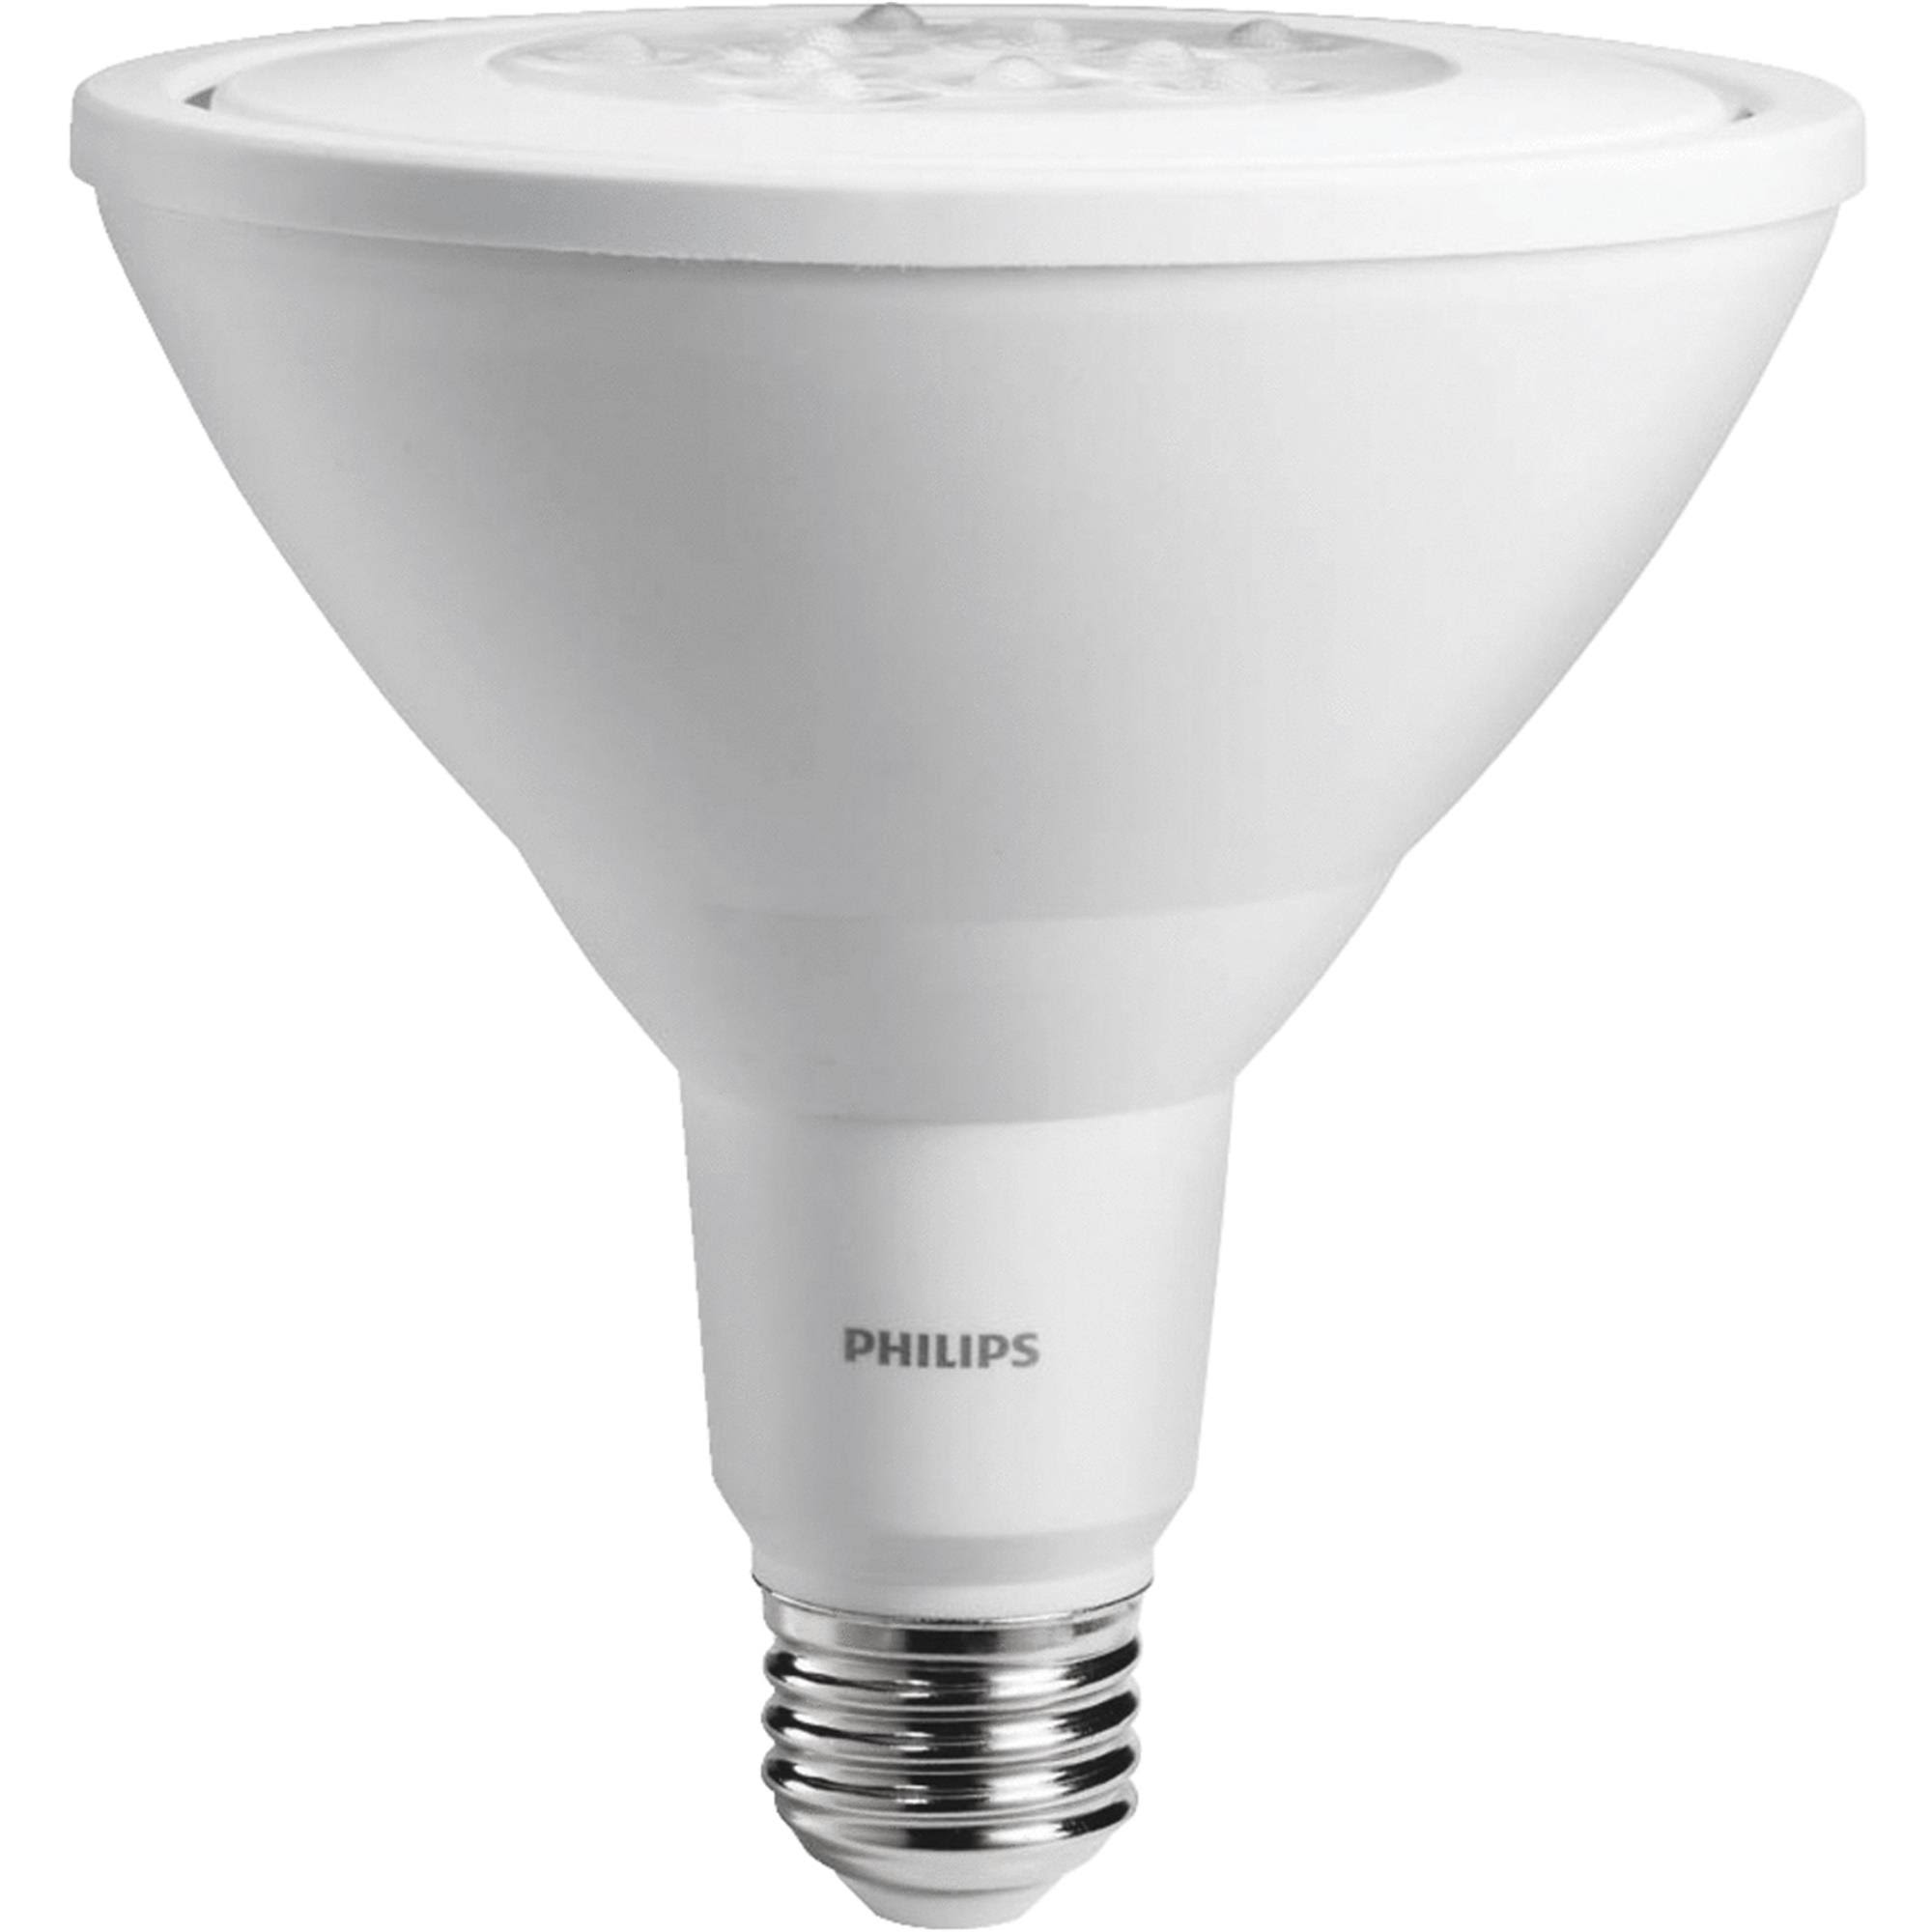 Philips LED Classic Glass Indoor Outdoor Flood Light Bulb - 90W, Bright White, 2pk